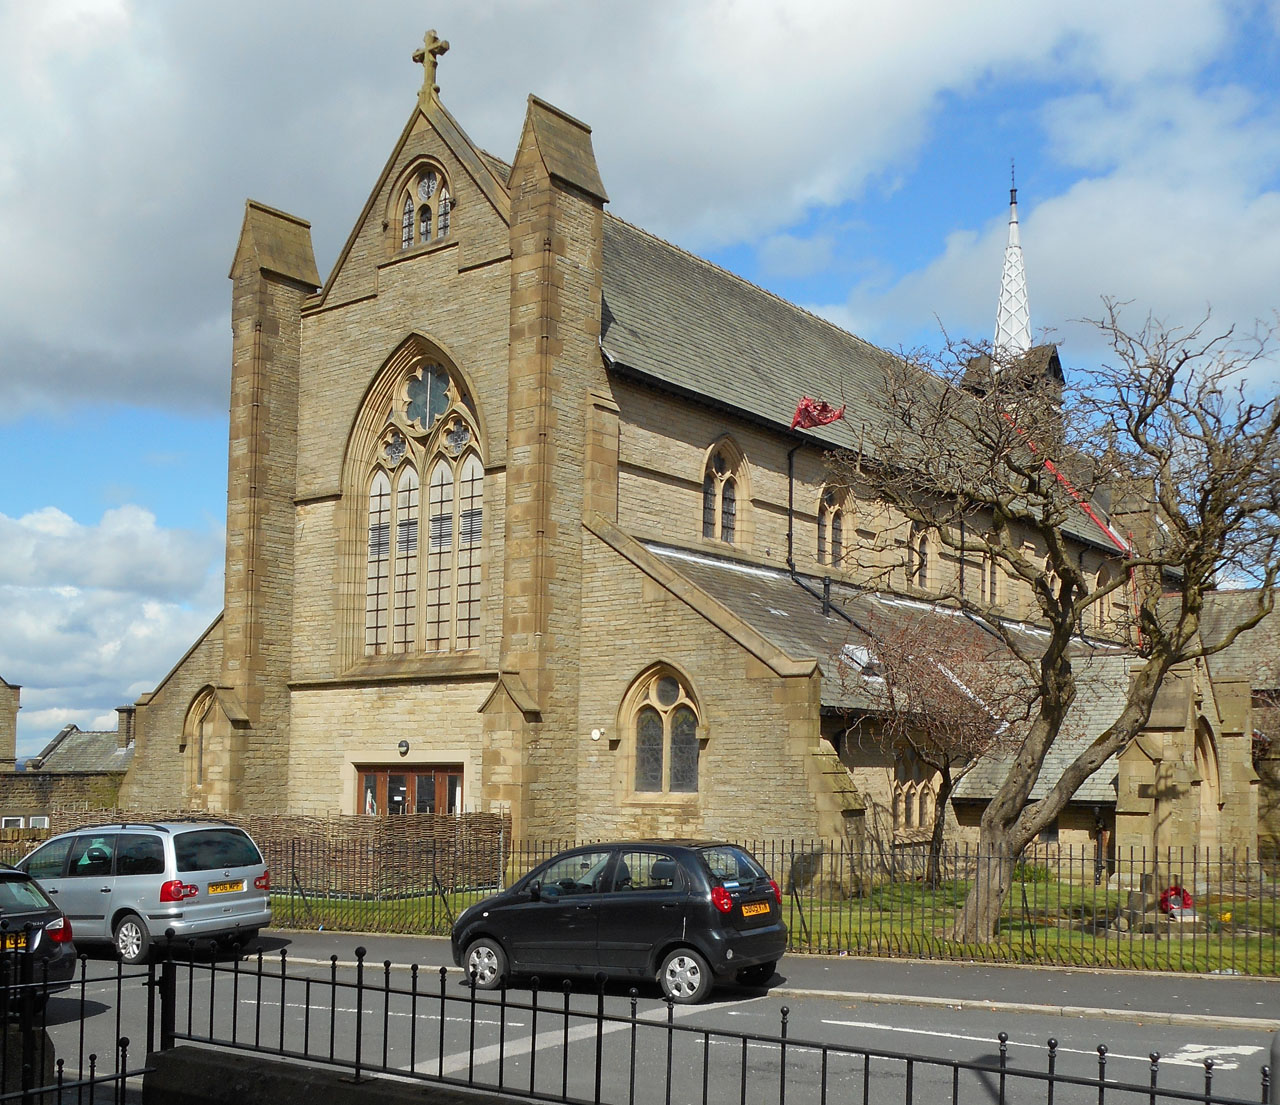 The Church of St Peter, Accrington